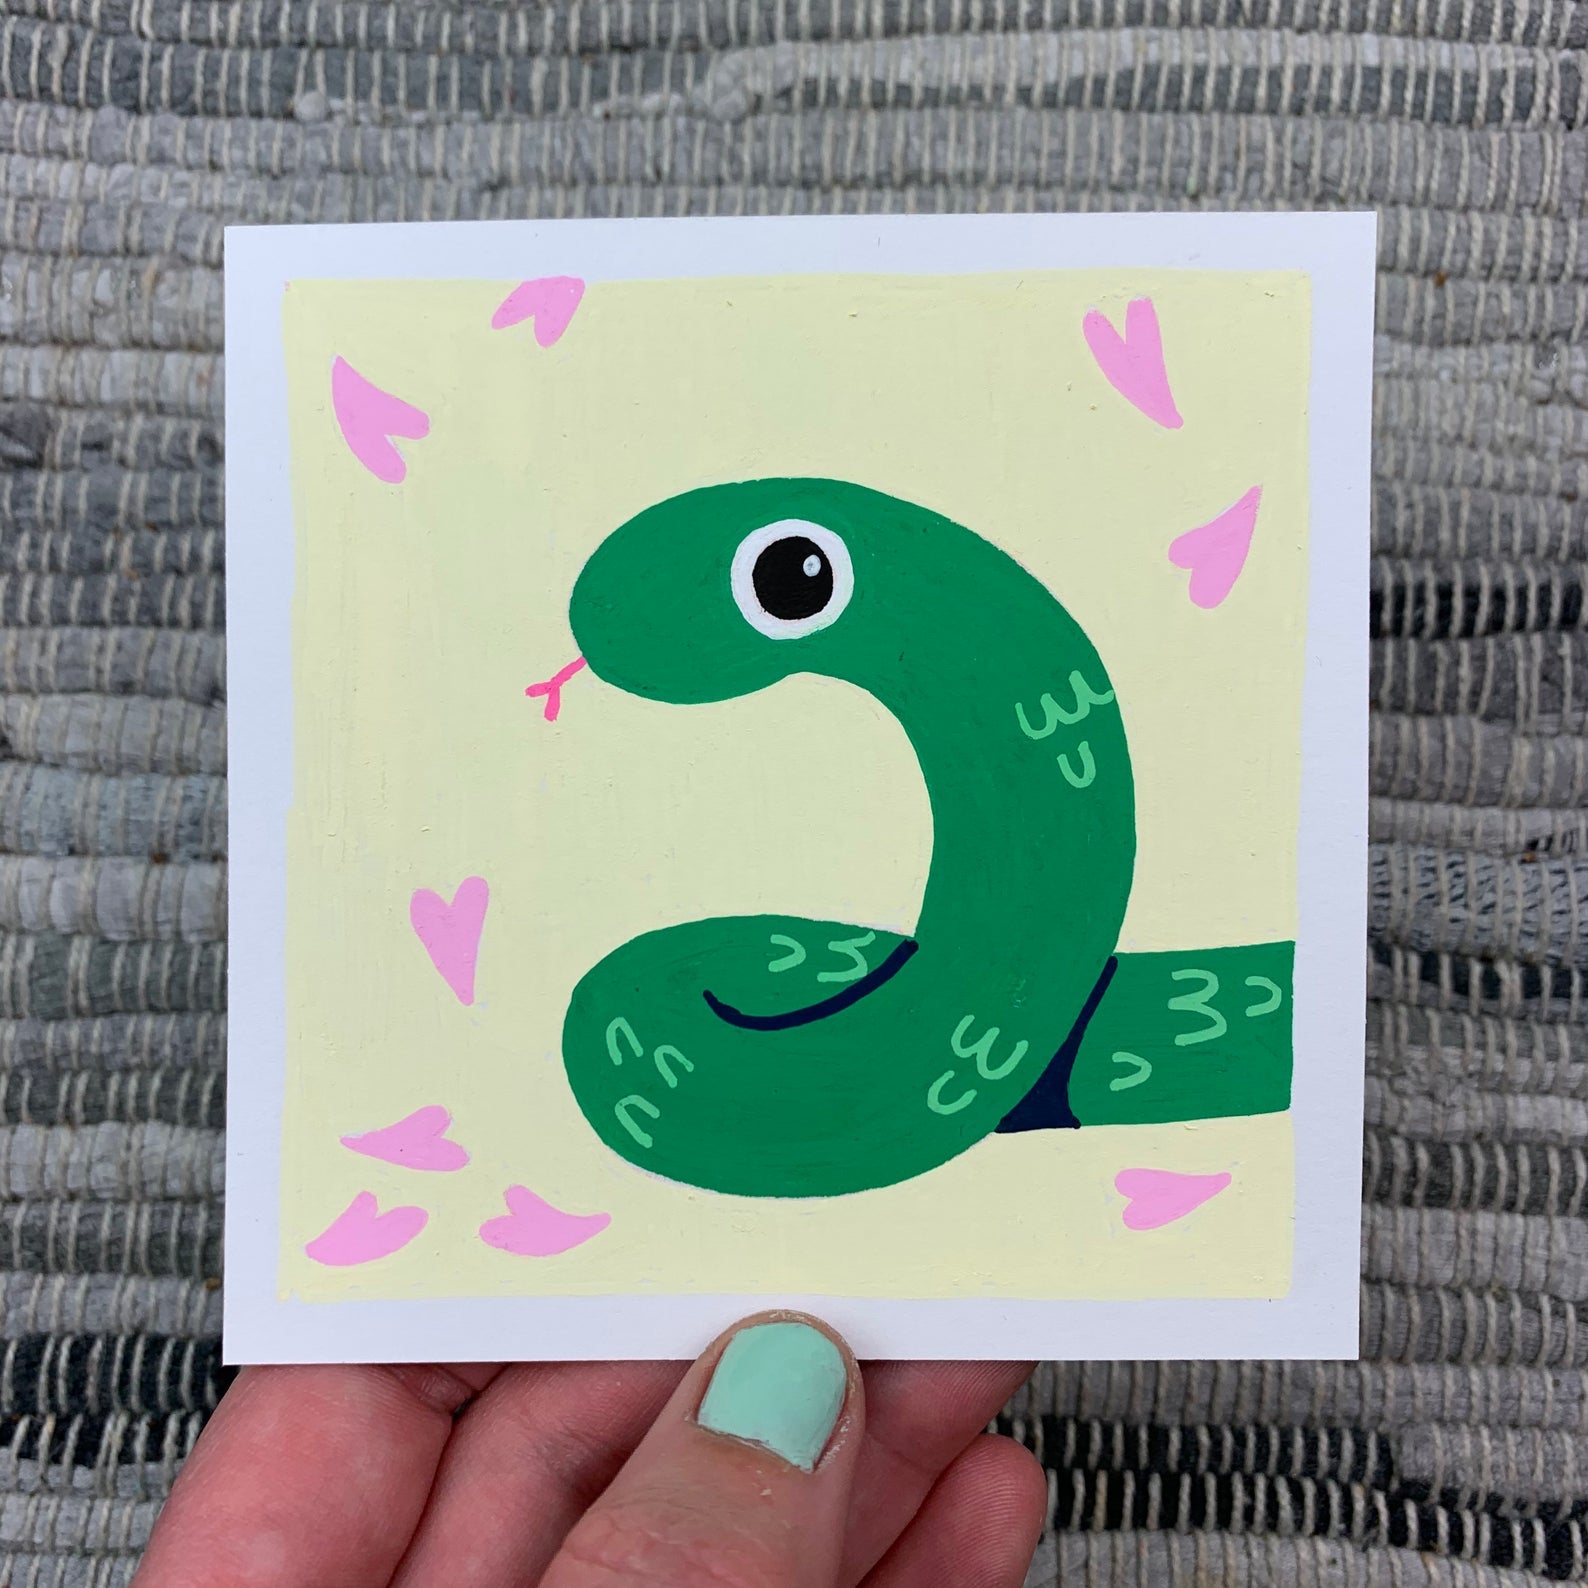 Original artwork of a cute green snake on a light yellow background with some pink petals falling around it. Materials used: Uni-Posca paint markers.